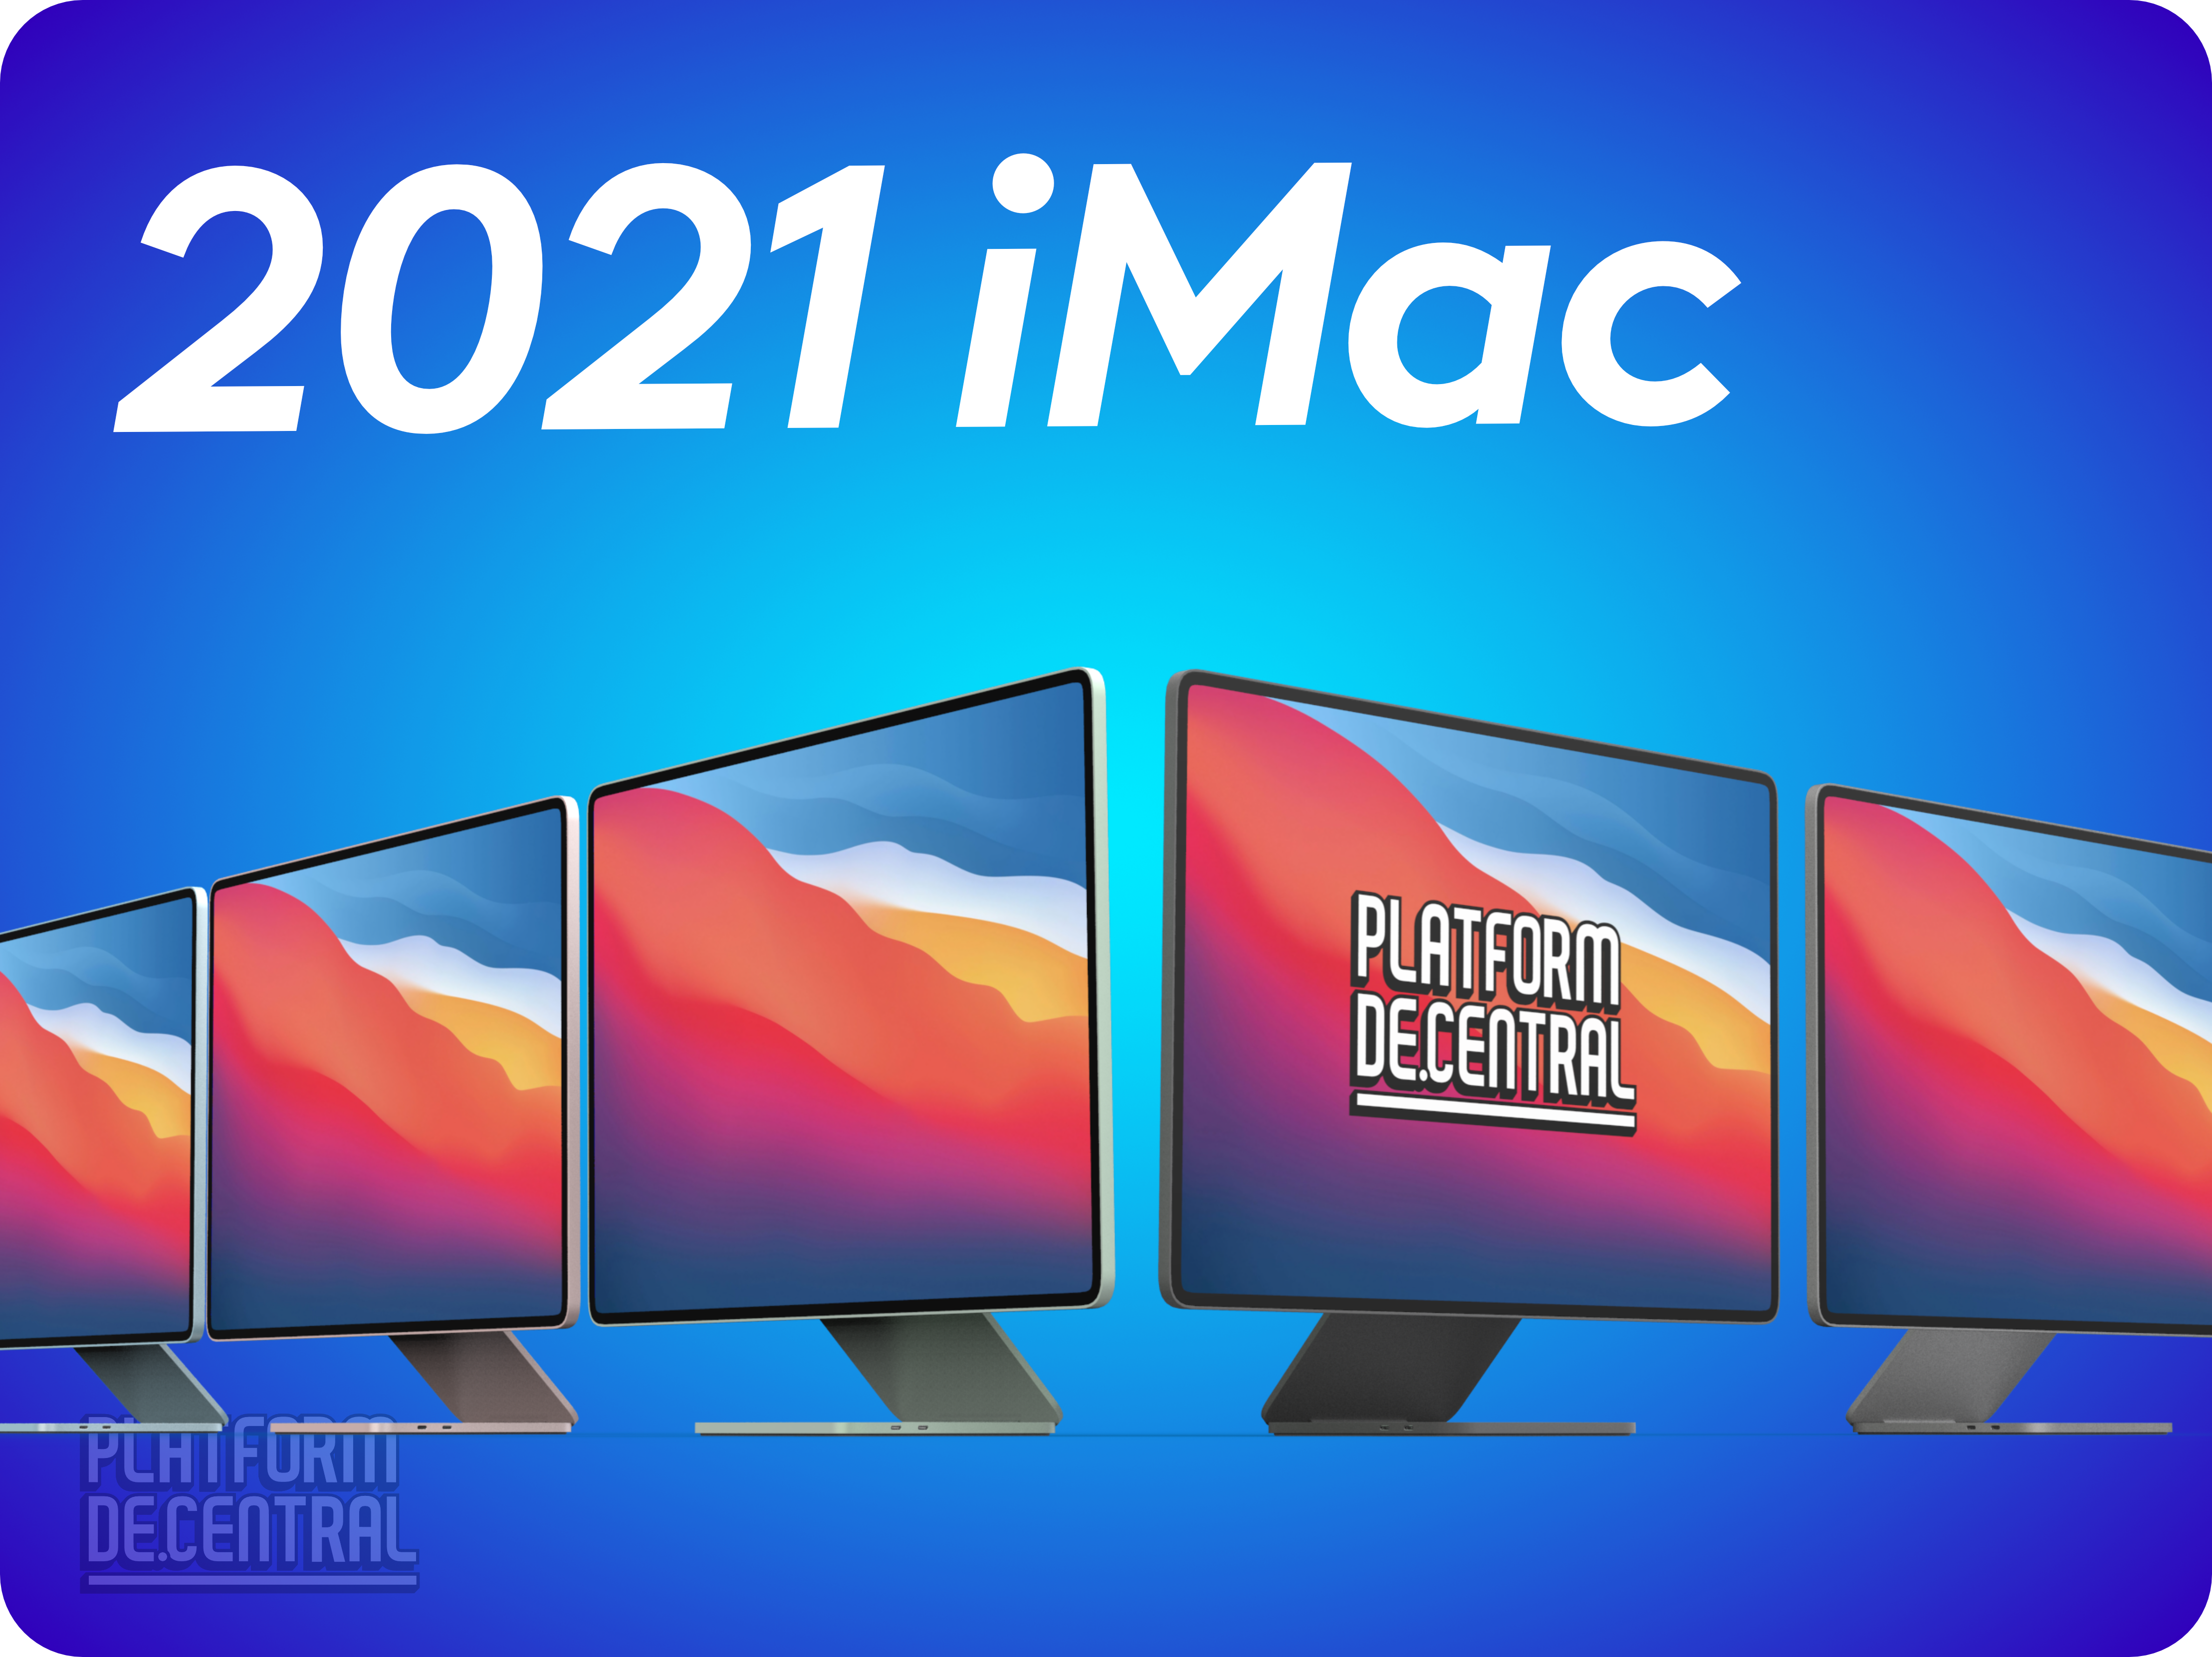 Exclusive Photos: 2021 iMac to come in 5 colors